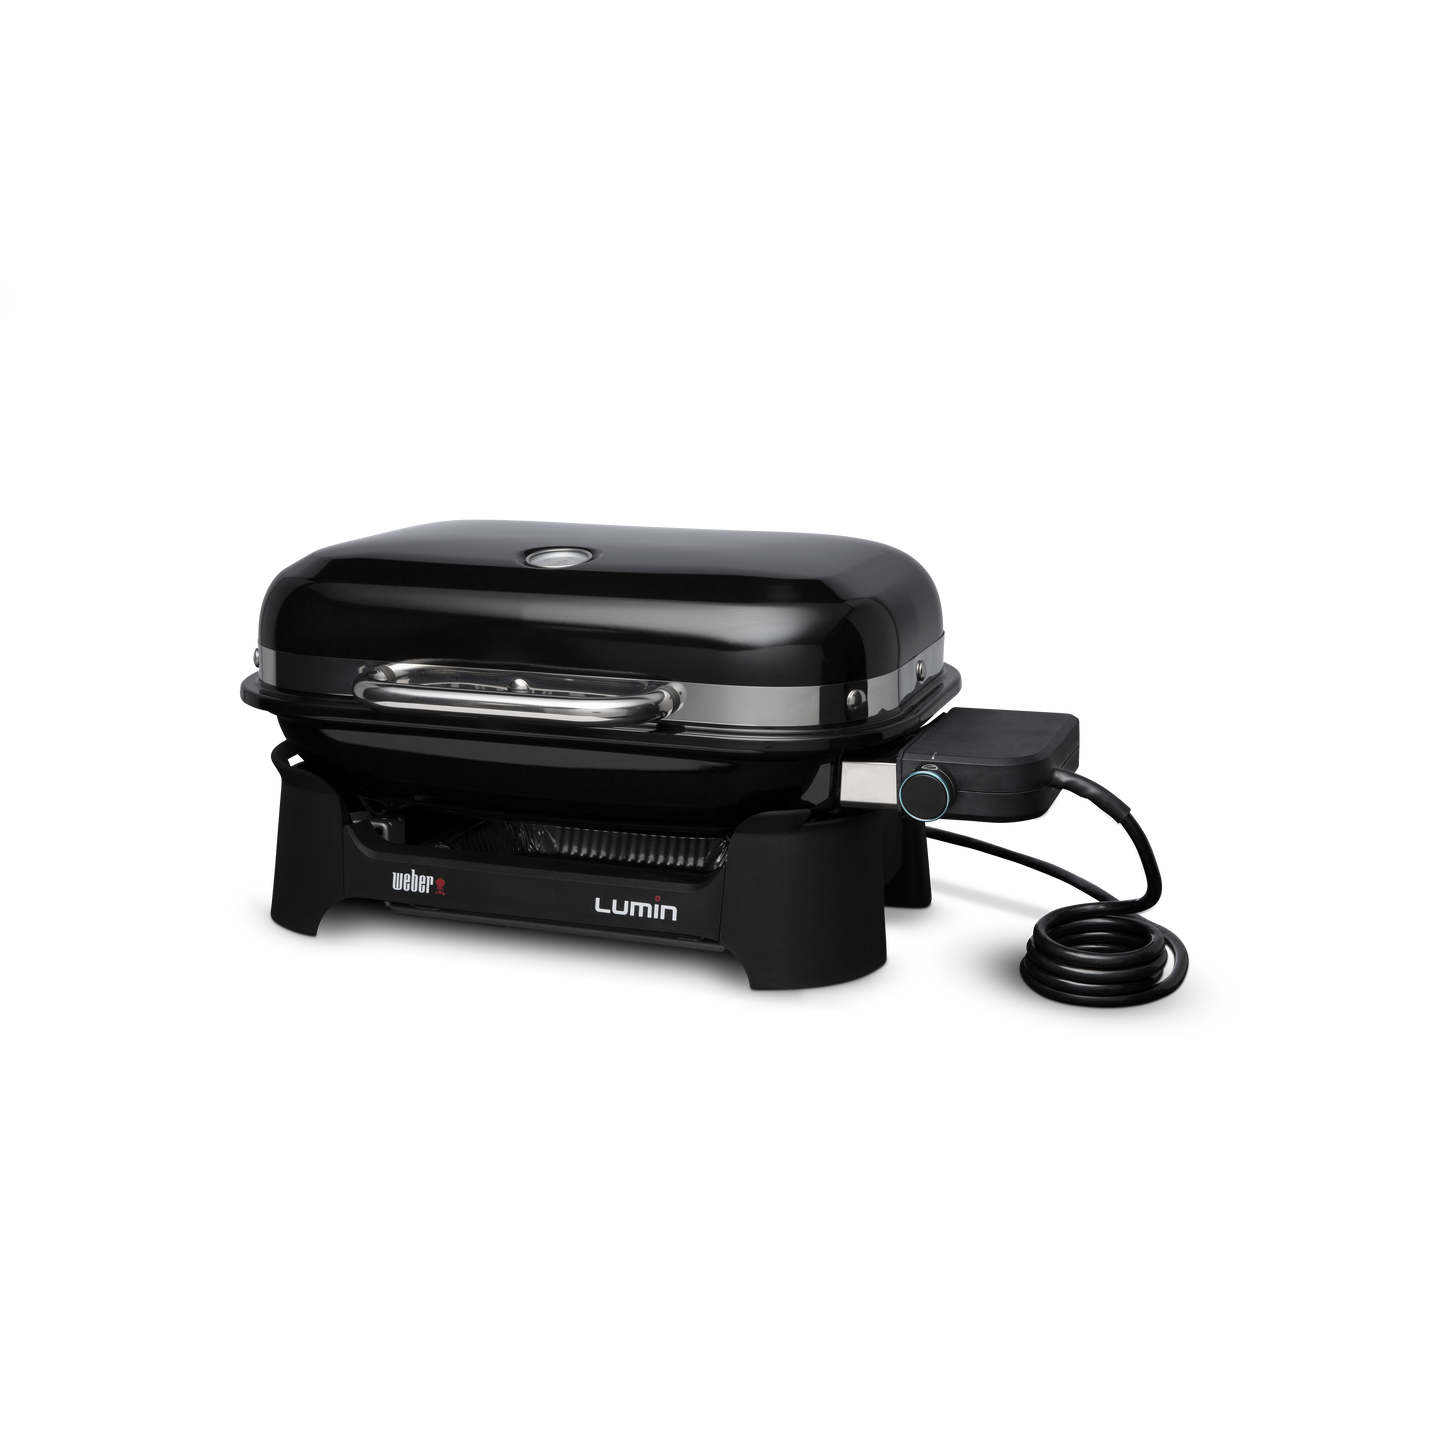 Weber Lumin Compact Electric Grill - Black Weber Chilliwack BBQ Supply